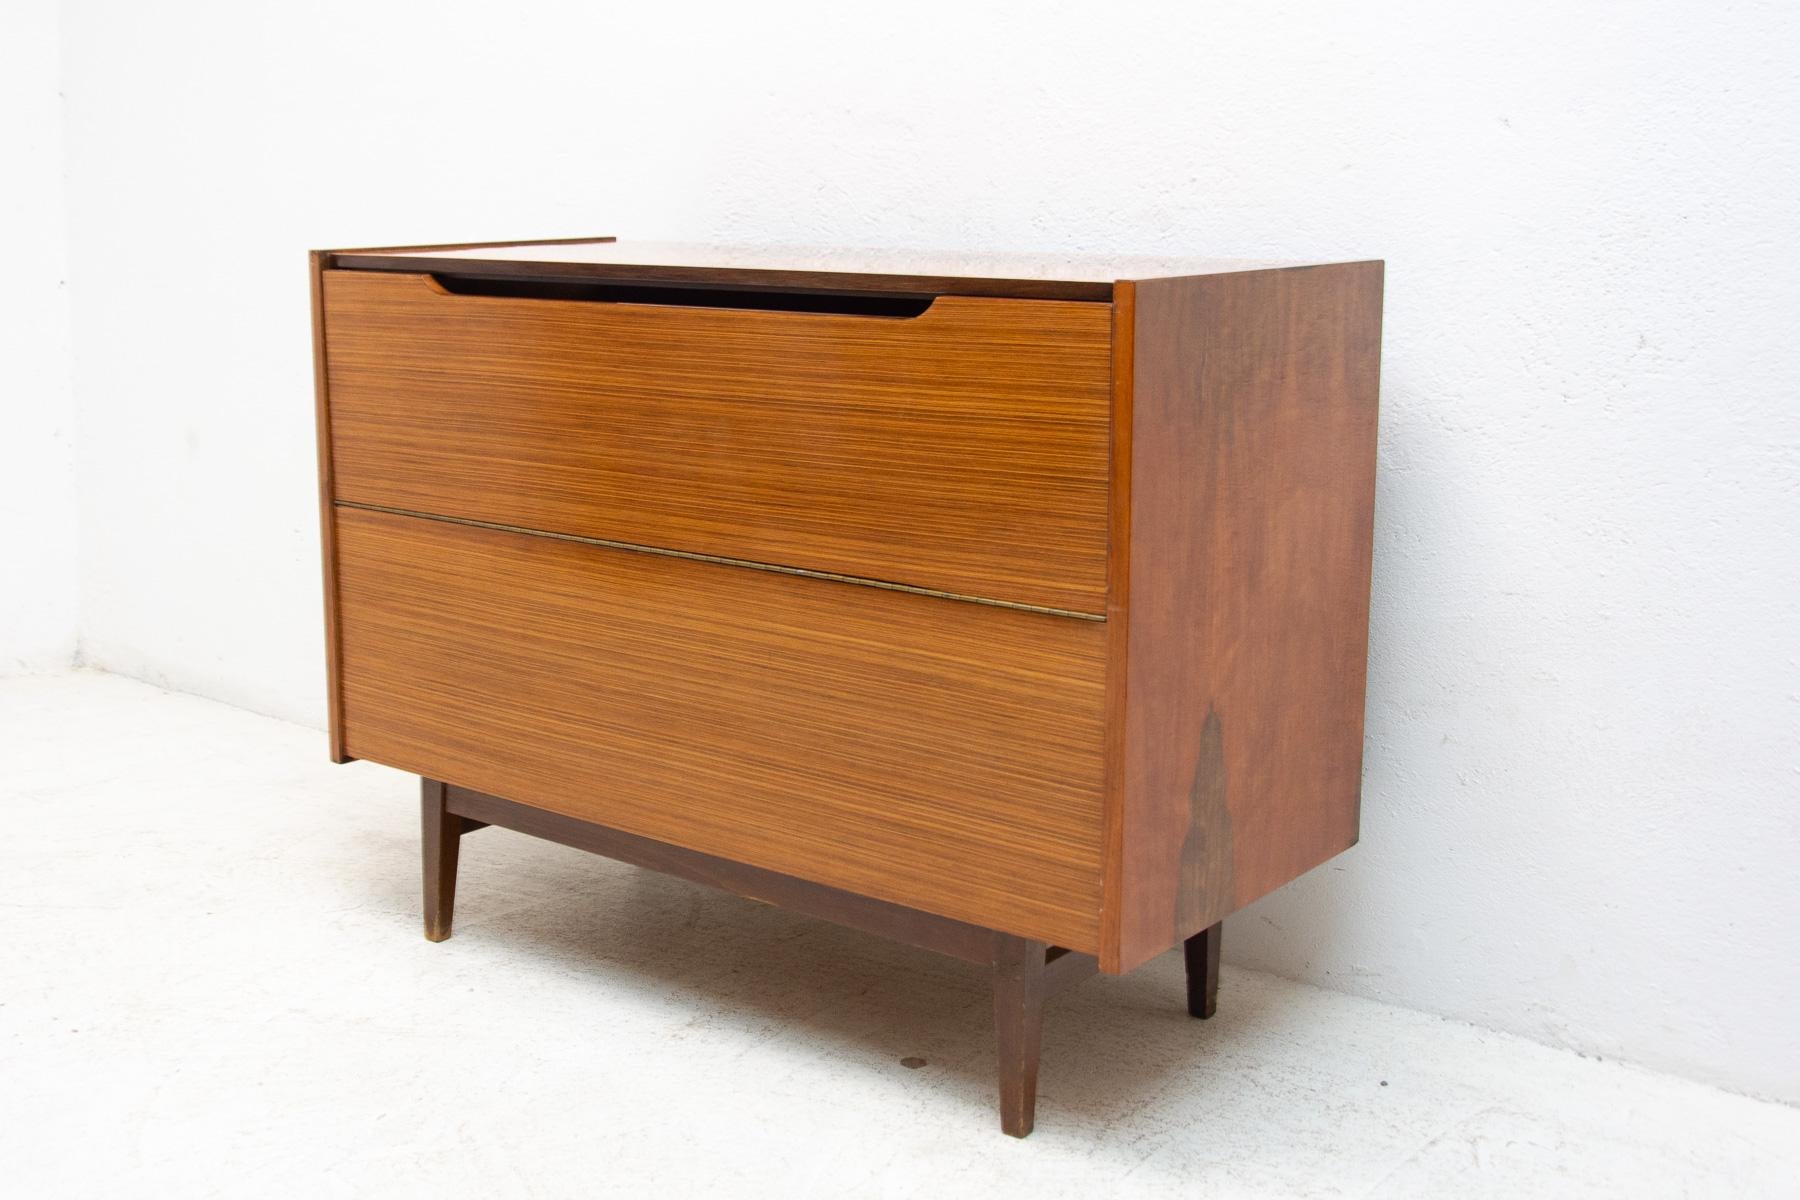 This mid century dresser was made in the former Czechoslovakia in the 1970´s. Most likely by Interiér Praha.
Beautiful walnut veneer.

It can also be used as a TV table or bar.
In very good Vintage condition, showing slight signs of age and